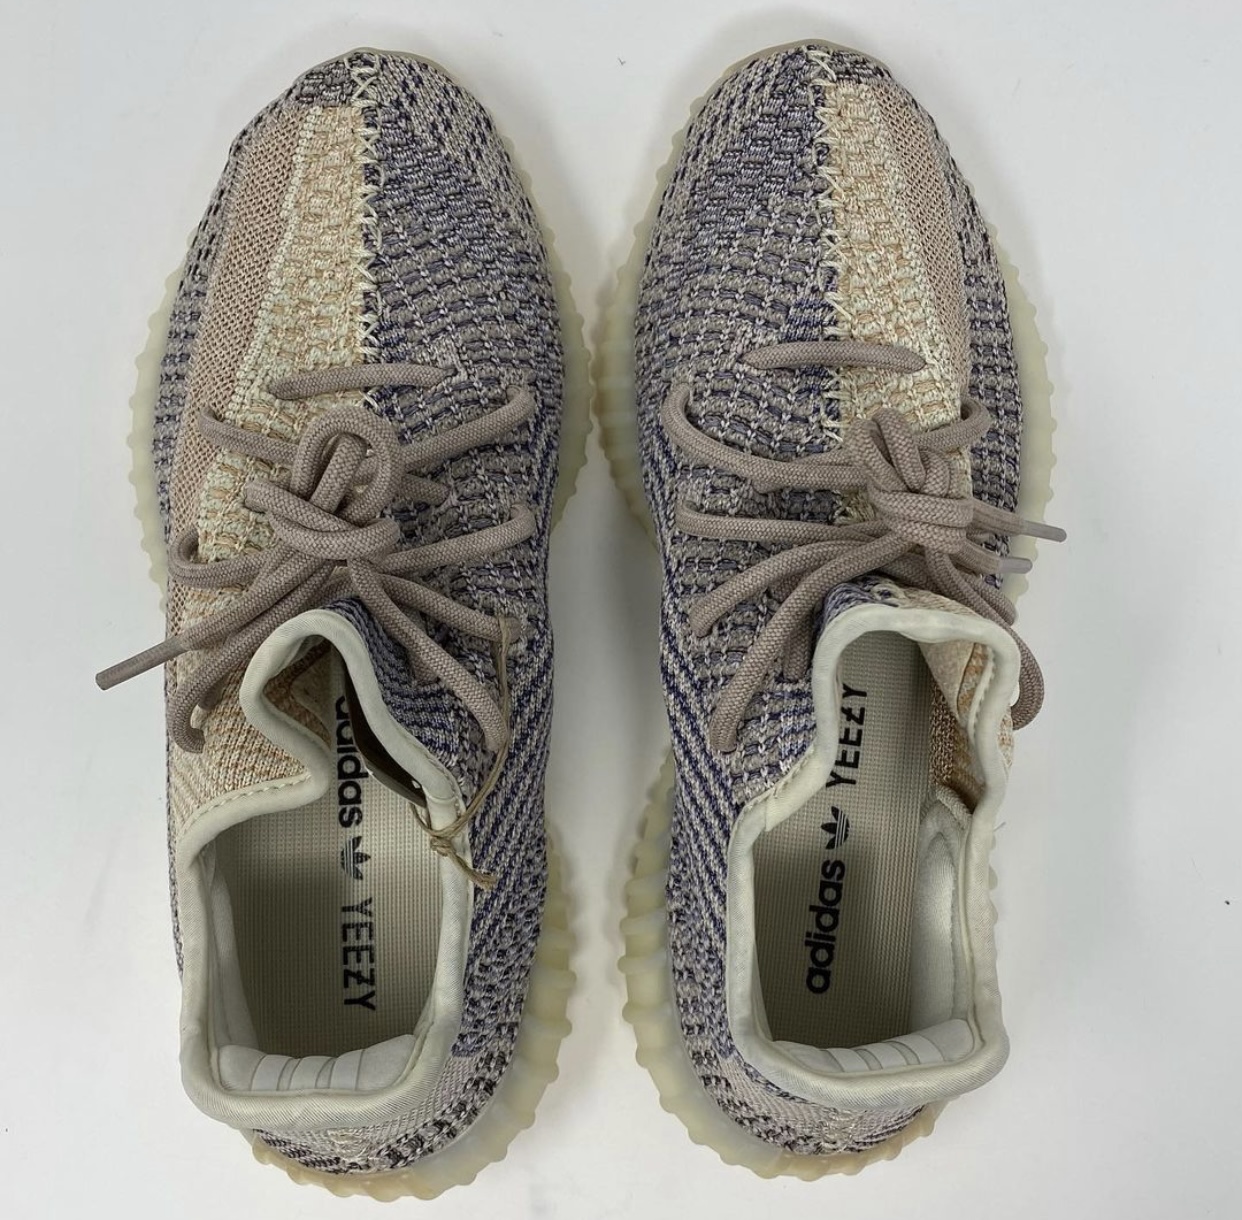 adidas Yeezy Boost 350 V2 Ash Pearl GY7658 Release Date